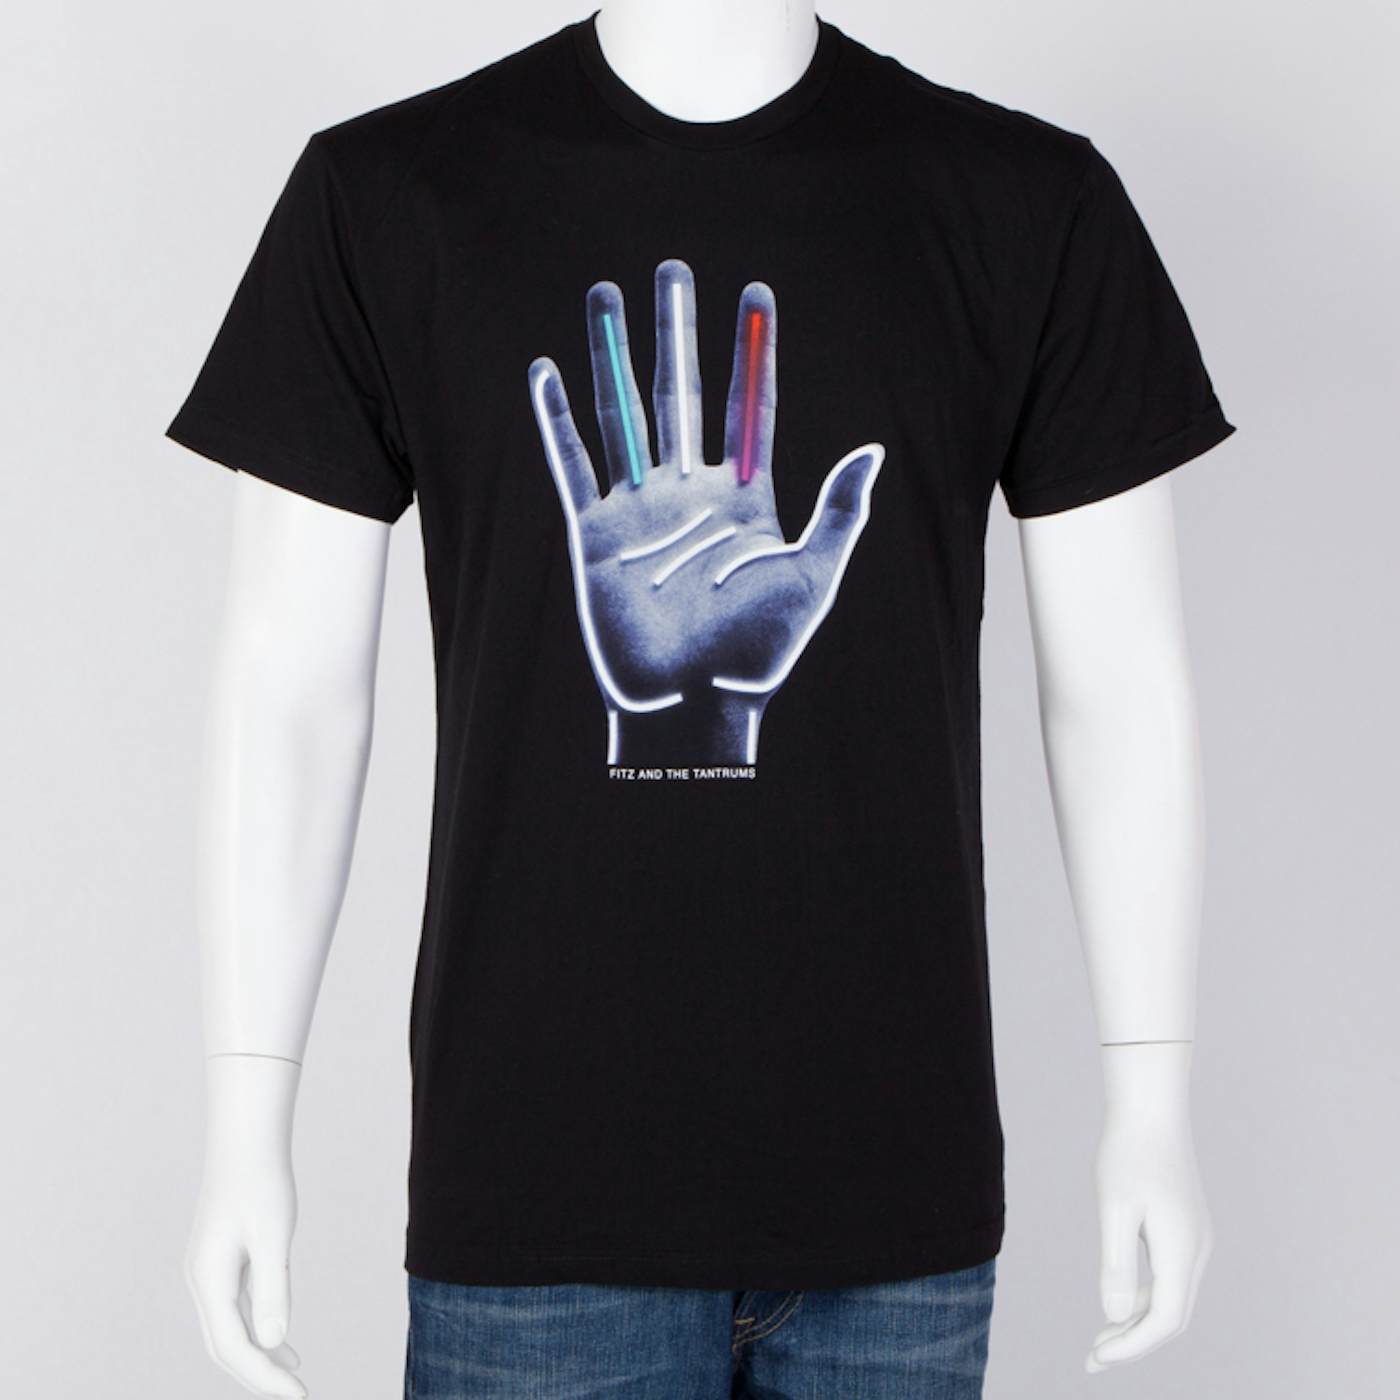 Fitz and The Tantrums "Hand" T-Shirt